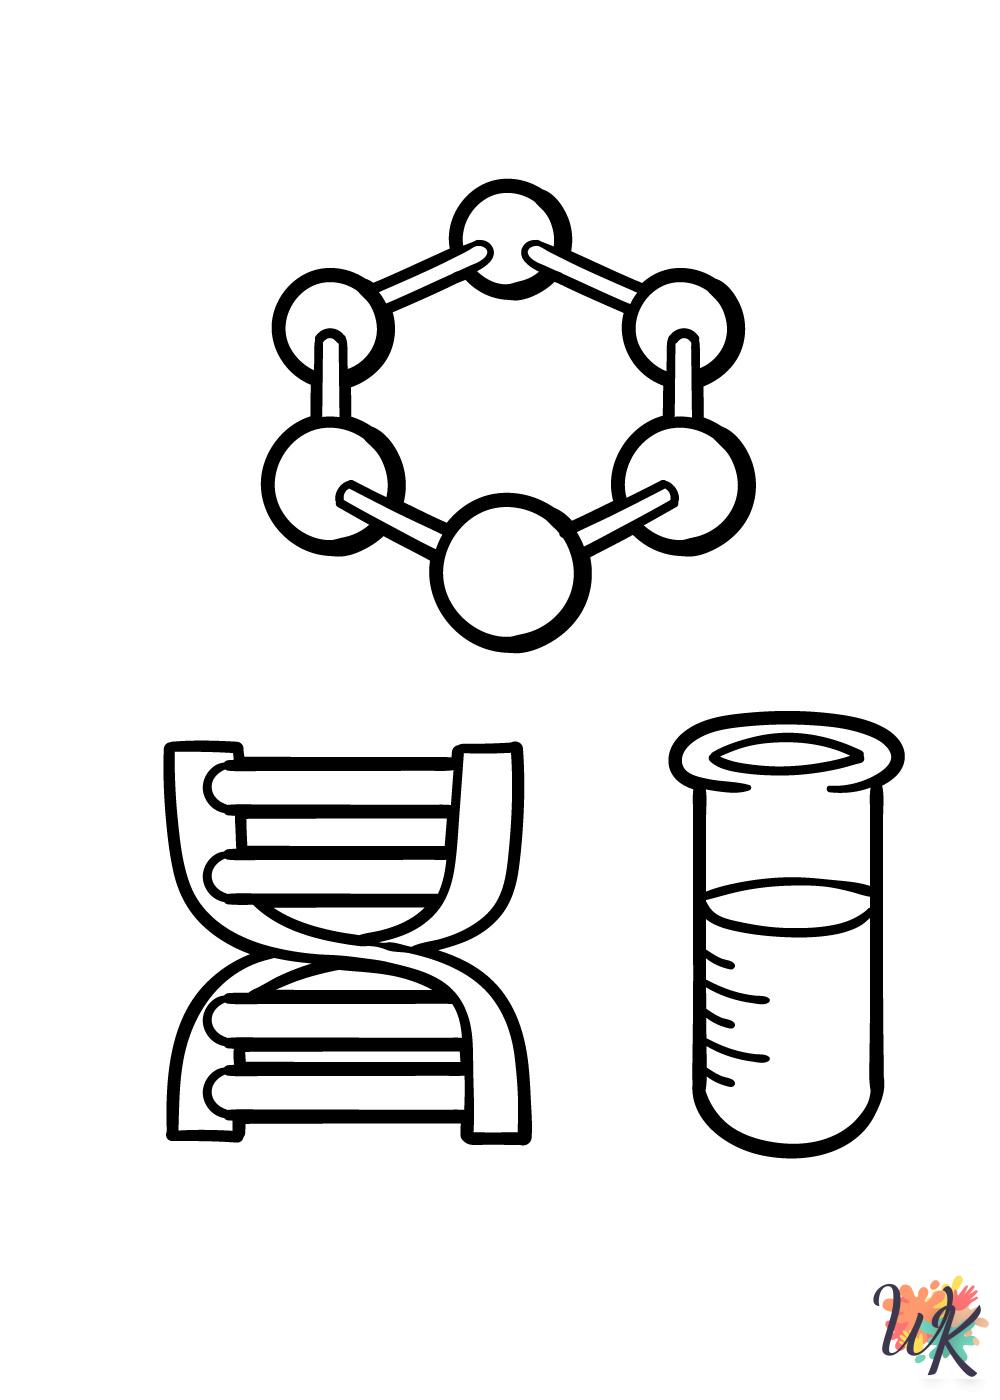 Science coloring pages for kids